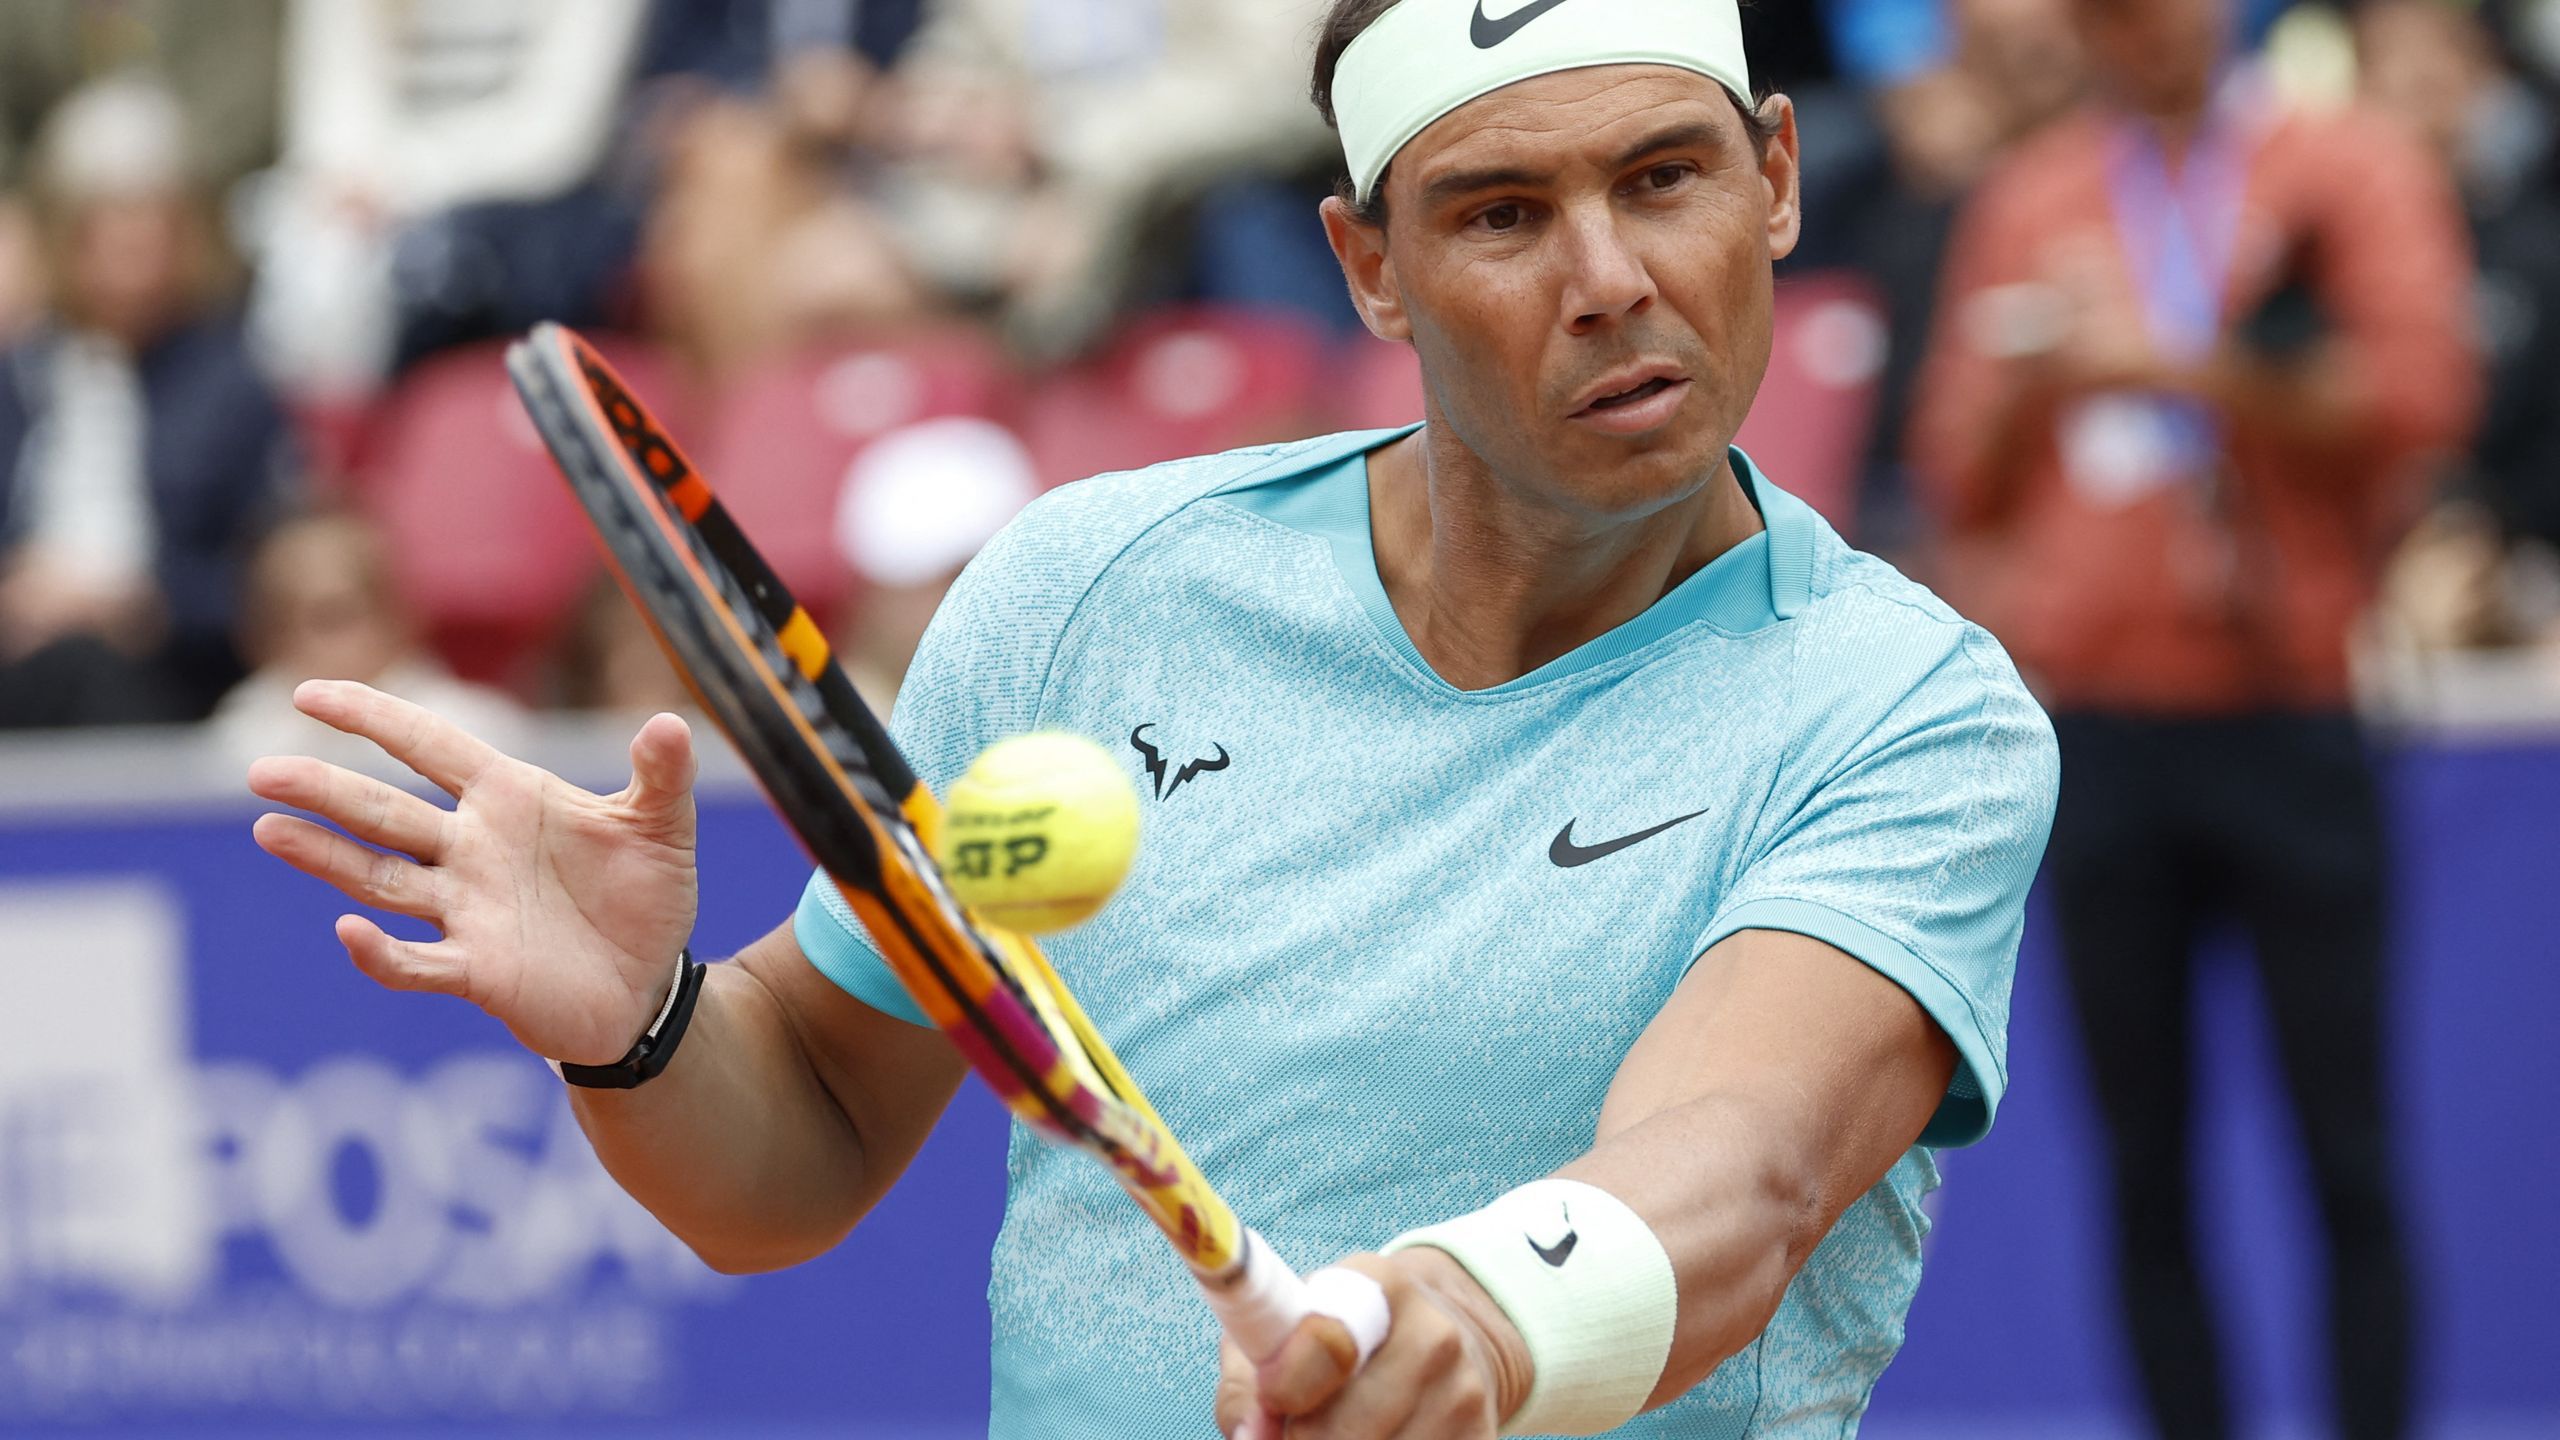 Rafael Nadal ‘happy’ as he returns to action with a double win alongside Casper Ruud in Sweden